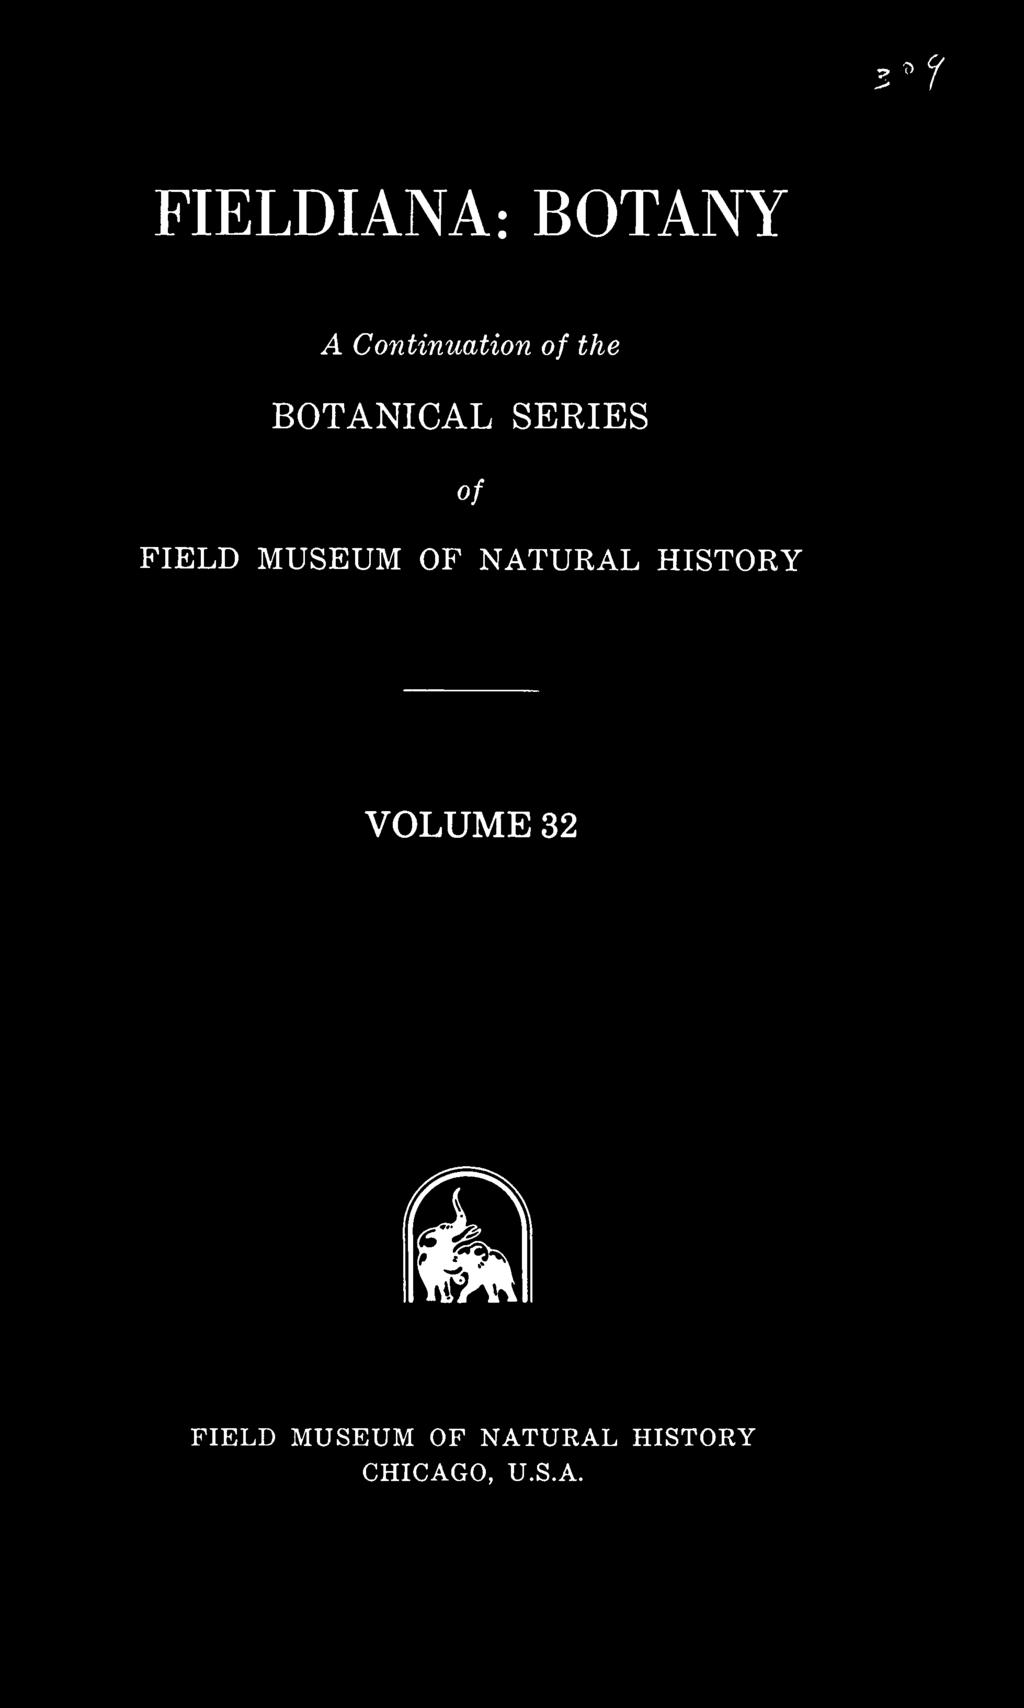 OF NATURAL HISTORY VOLUME 32 FIELD